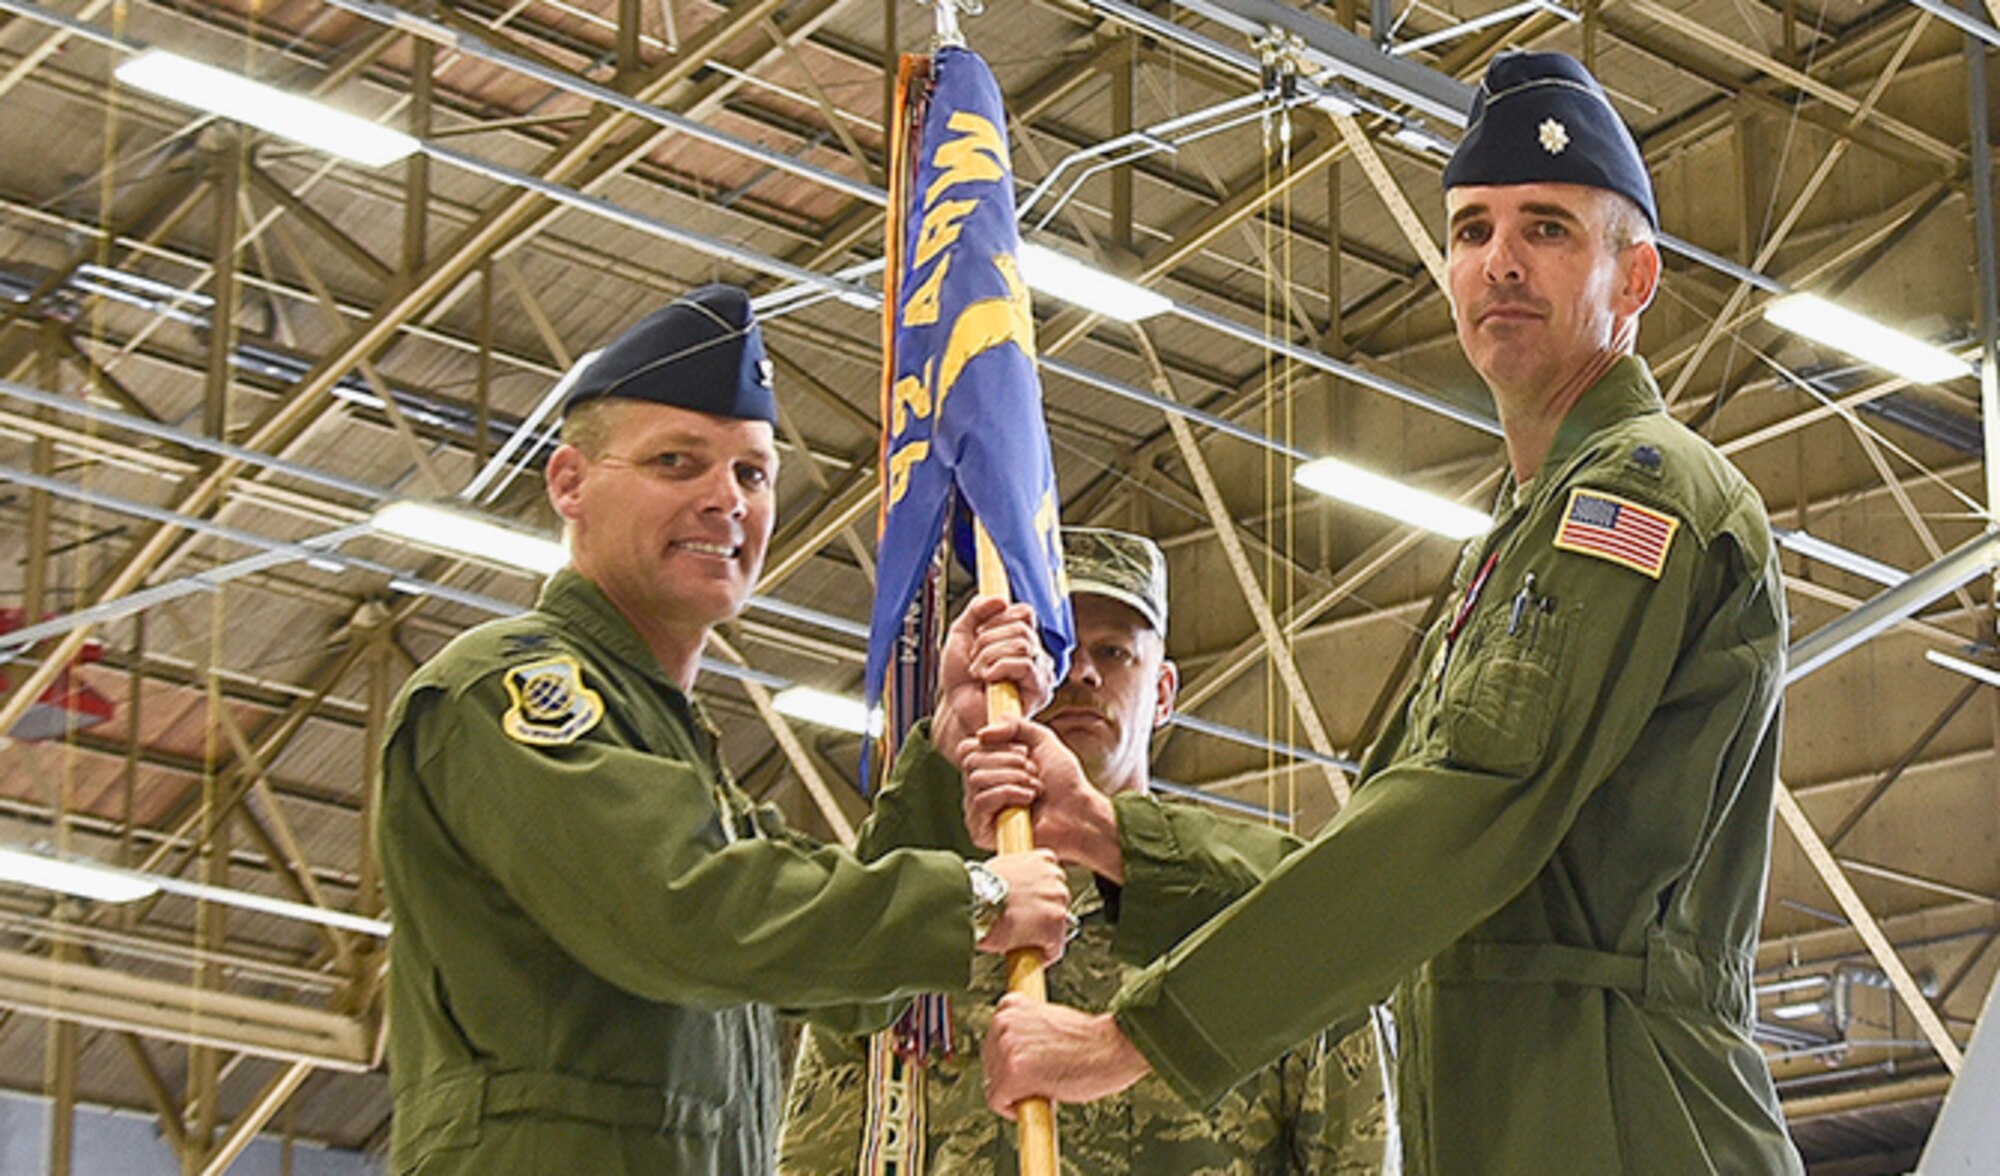 Col. Scott Gundlach, 92nd Operations Group commander, passes the 93rd Air Refueling Squadron guidon to Lt. Col. Jeremy Williams, 93rd ARS commander, during the change of command ceremony June 23, 2016, at Fairchild Air Force Base, Wash. Williams previously held the director of operations position for the 92nd ARS before moving to the 93rd ARS to become the commander. (U.S. Air Force photo/Airman 1st Class Taylor Shelton)